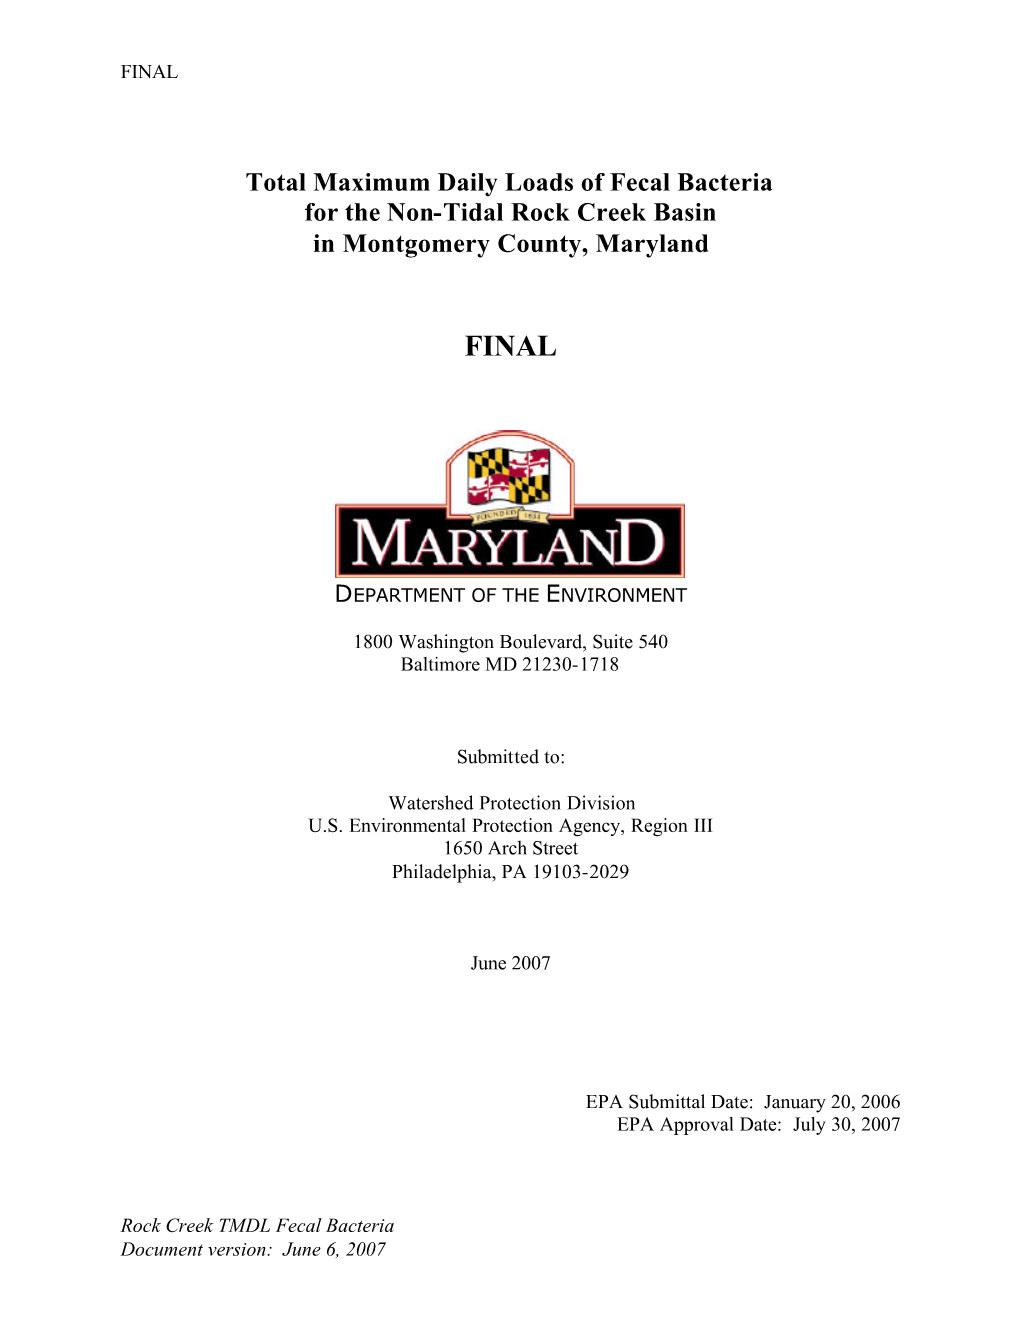 Total Maximum Daily Loads of Fecal Bacteria for the Non-Tidal Rock Creek Basin in Montgomery County, Maryland